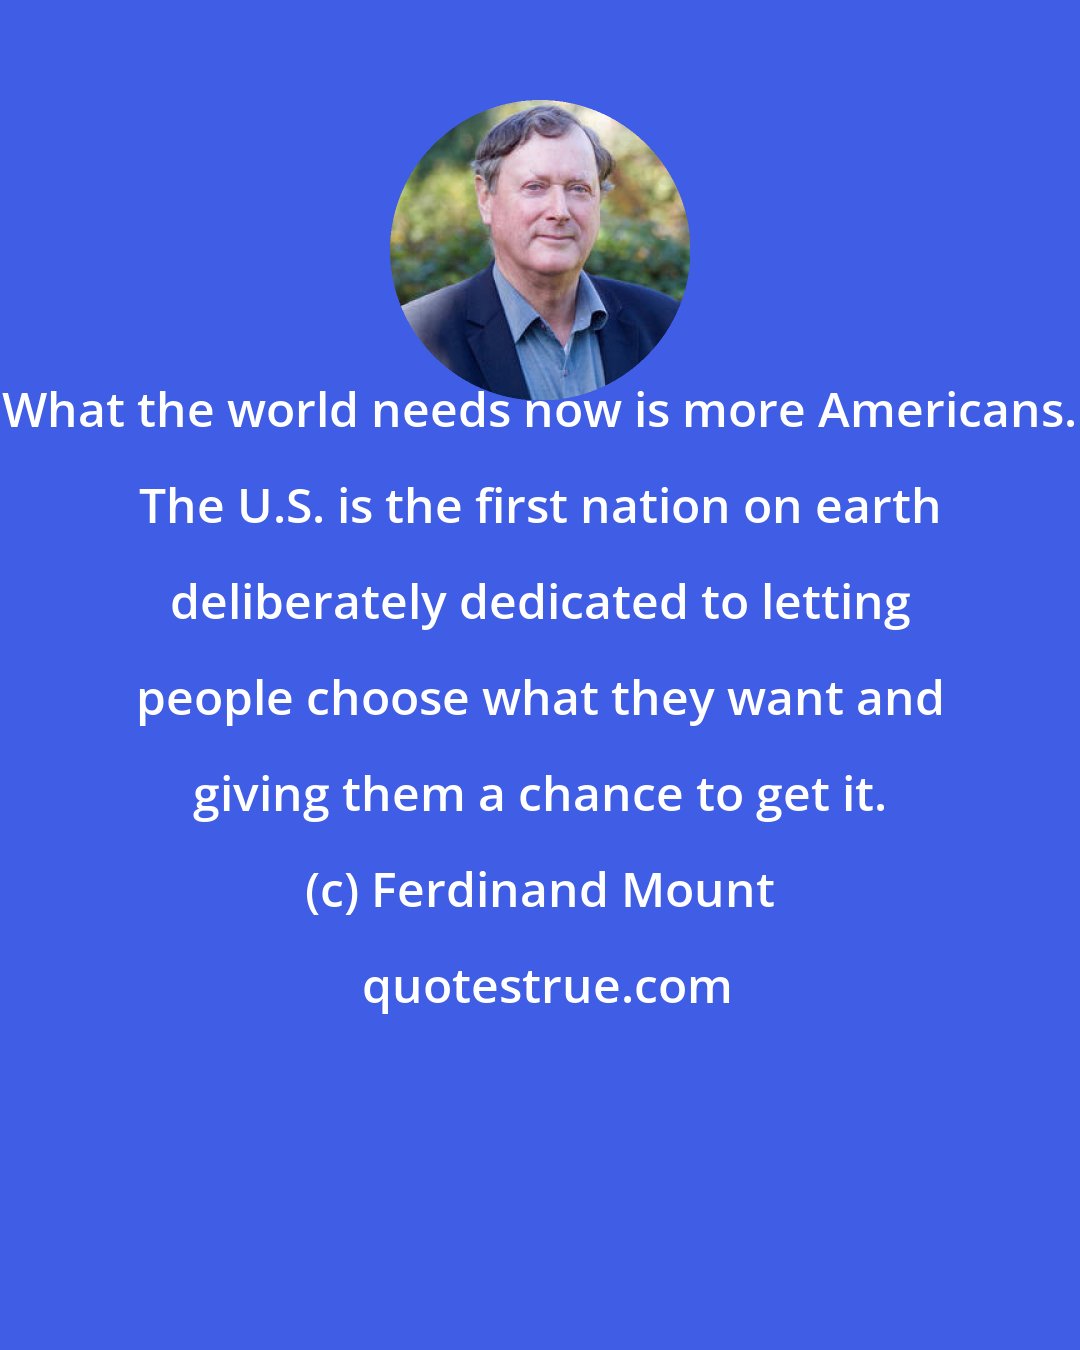 Ferdinand Mount: What the world needs now is more Americans. The U.S. is the first nation on earth deliberately dedicated to letting people choose what they want and giving them a chance to get it.